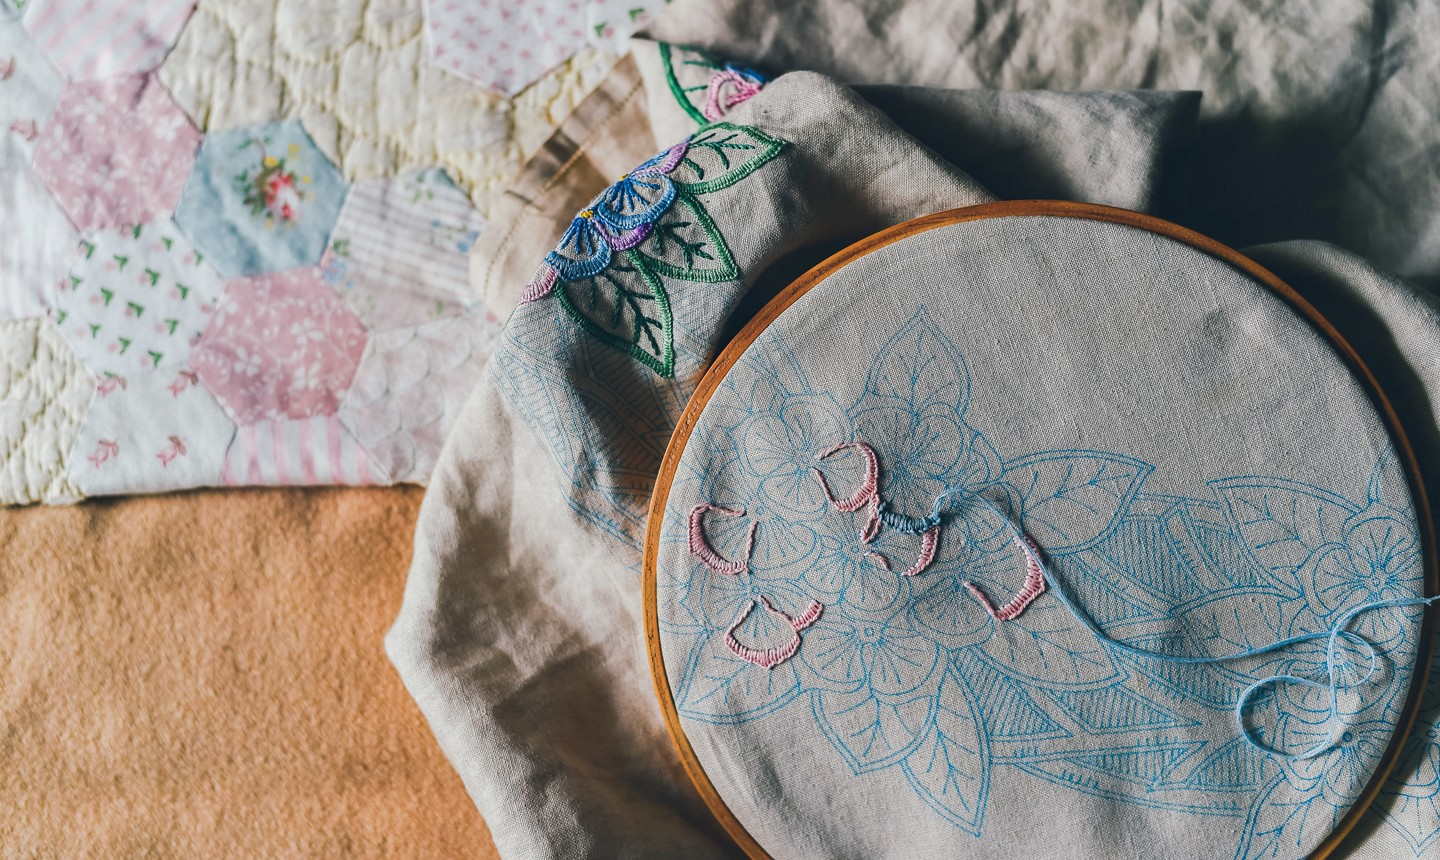 Free Vintage Embroidery Patterns Download 5 Simple Ways To Transfer Embroidery Designs